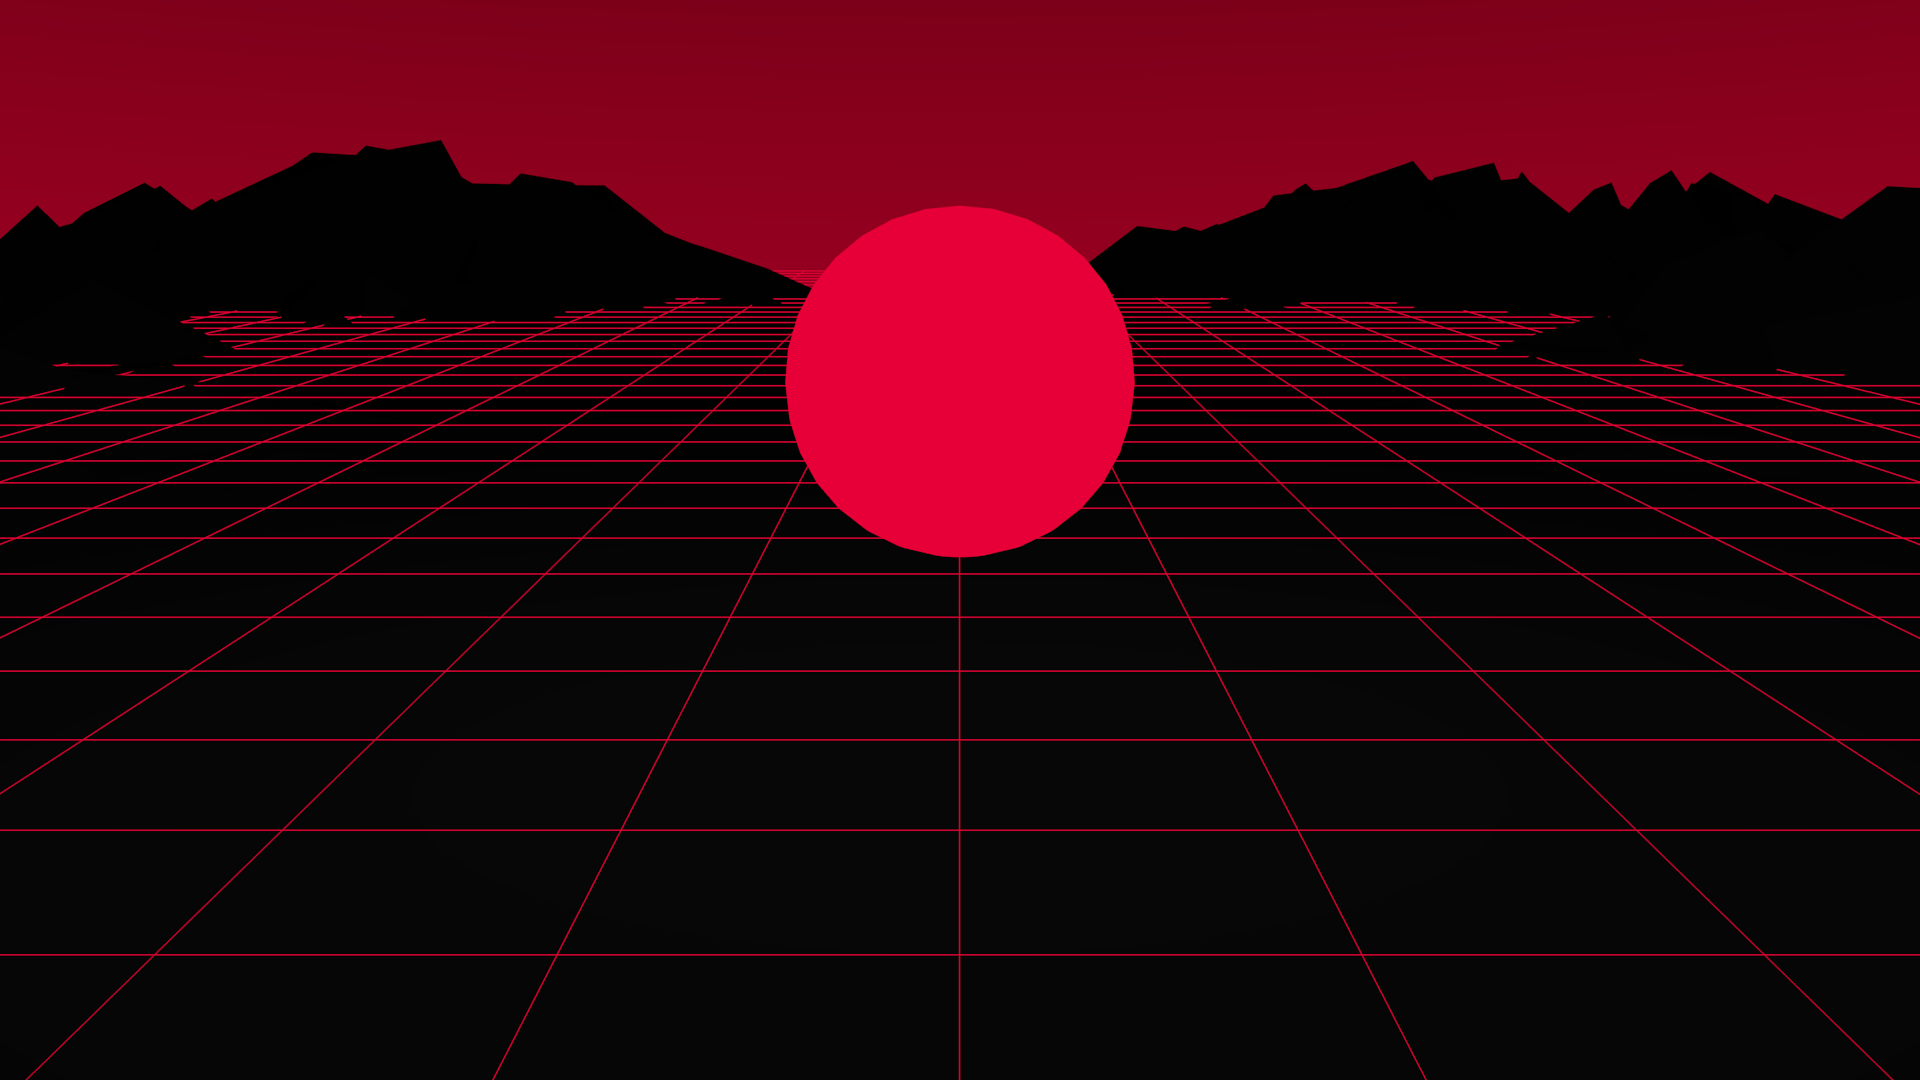 Photos OutRun Download. Red wallpaper, Aesthetic desktop wallpaper, Aesthetic wallpaper